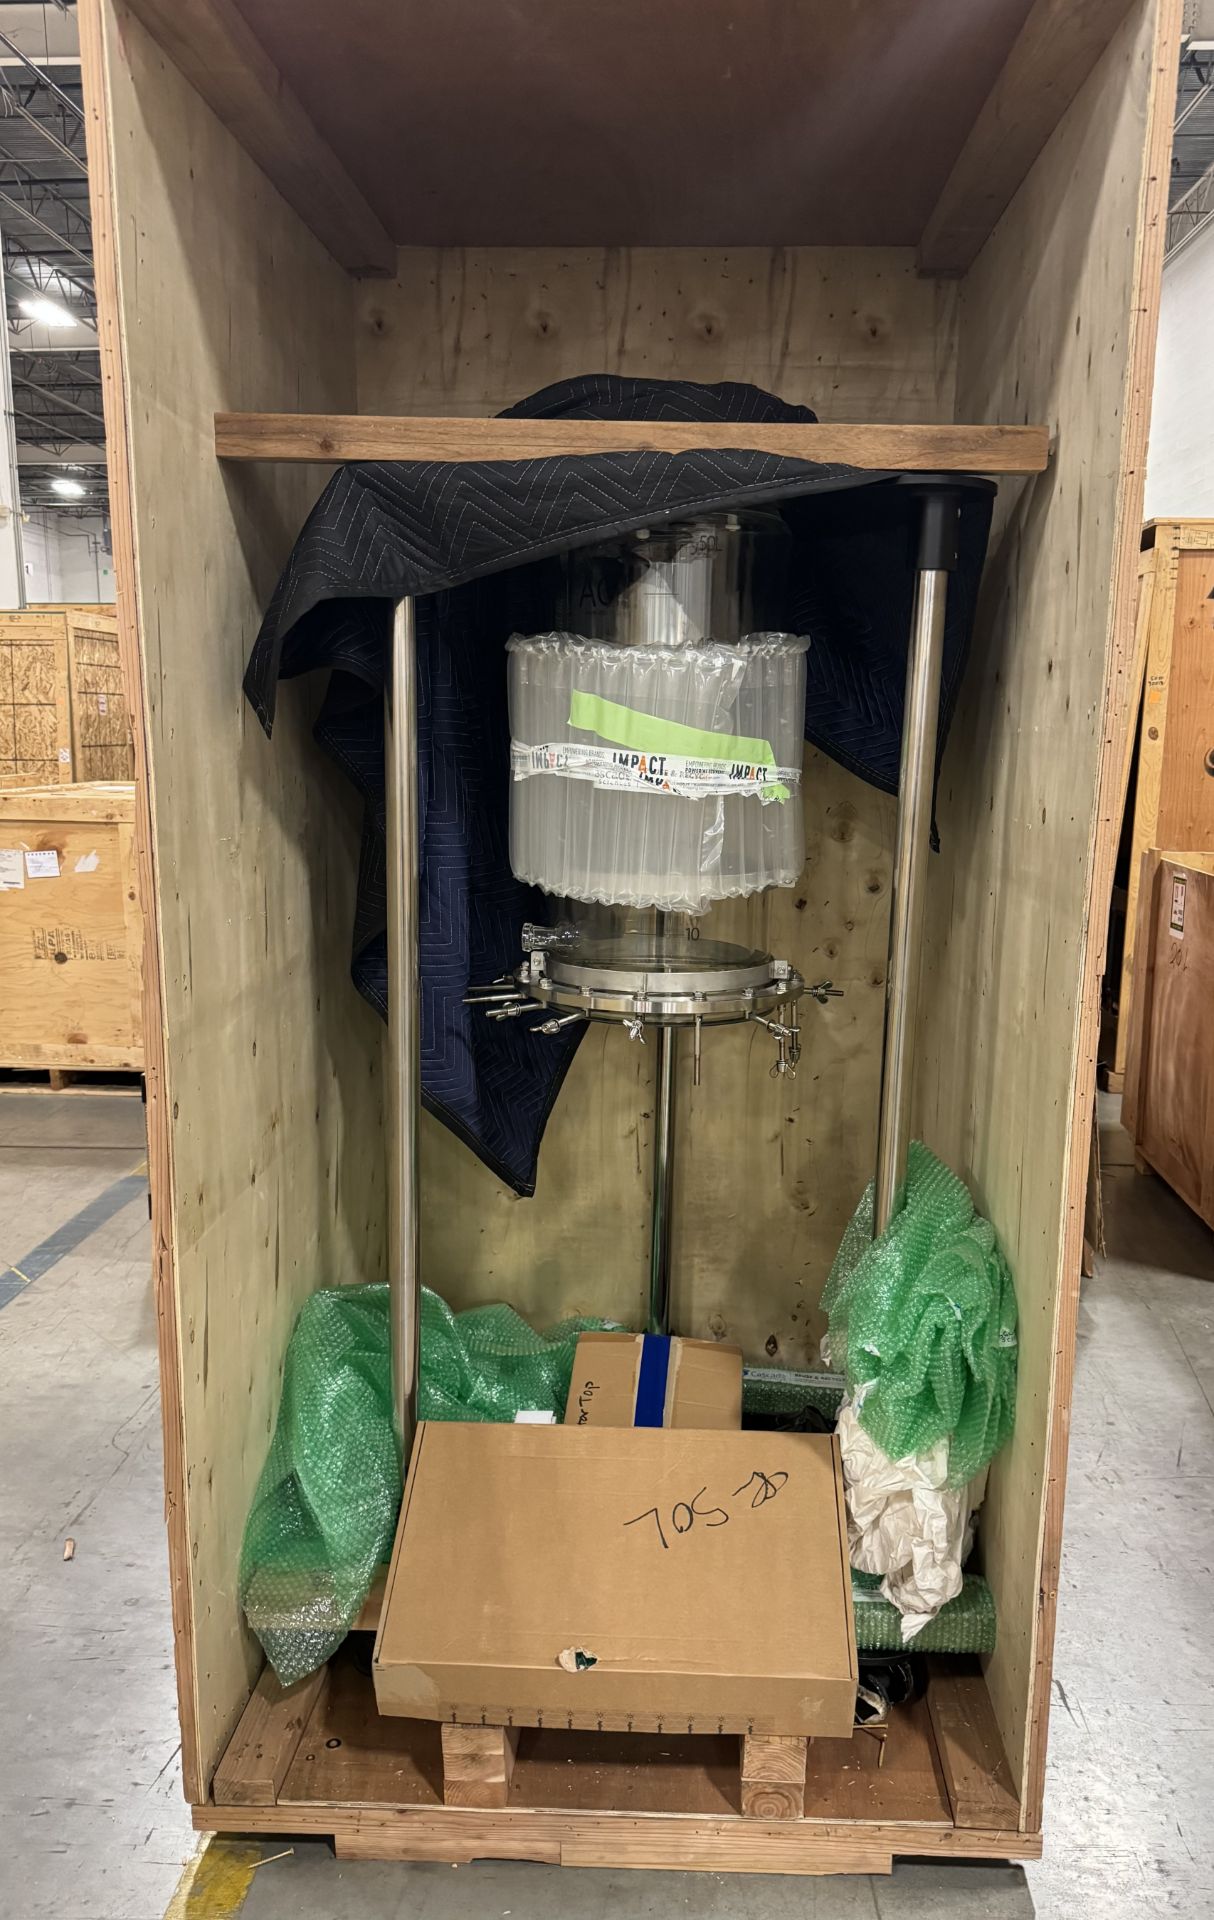 New/Unused 50 L Glass Filter Reactor System. Model CDR-50.